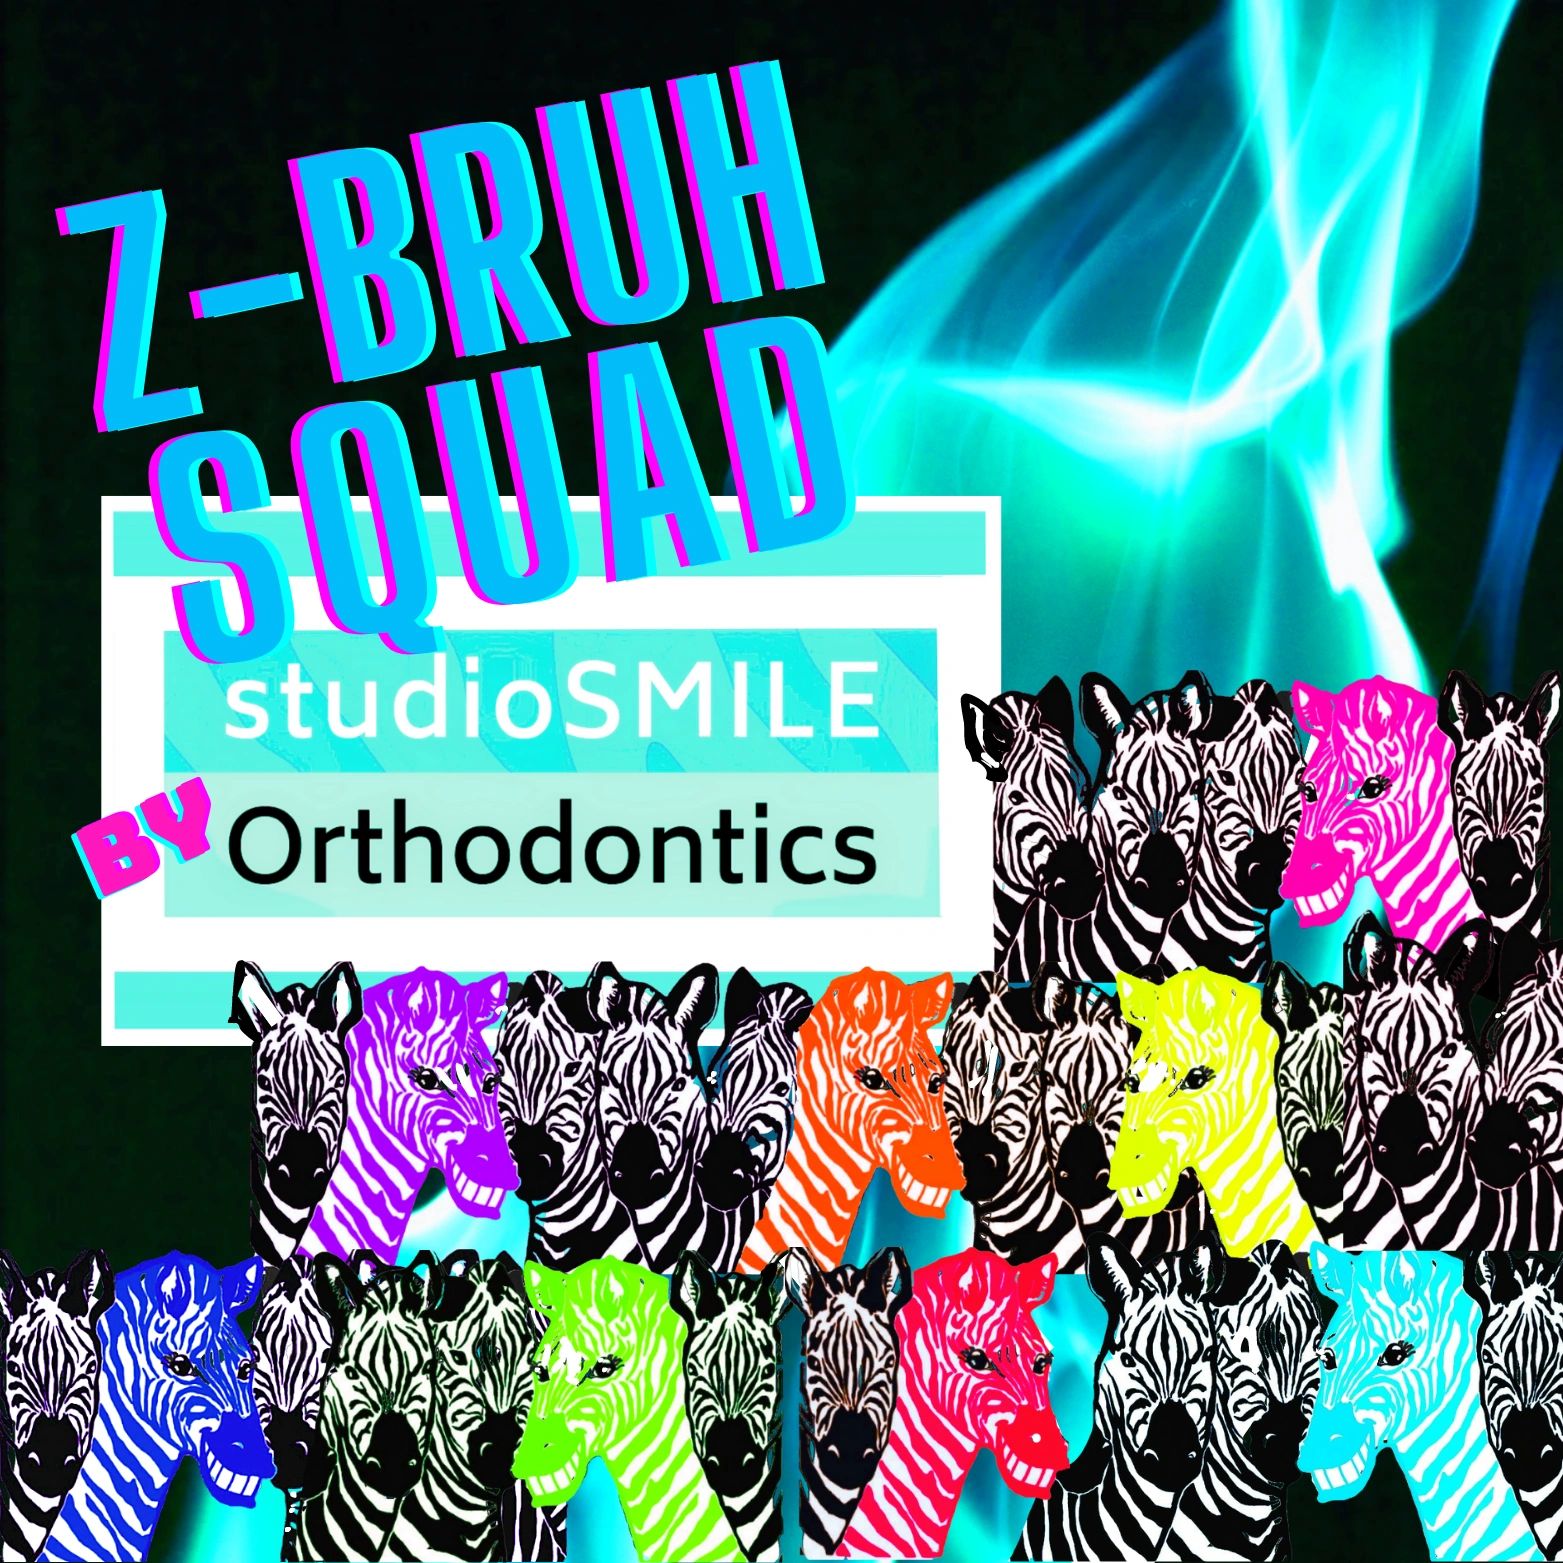 kids club with special treats and merch members only in orthodontic treatment special squad for kids